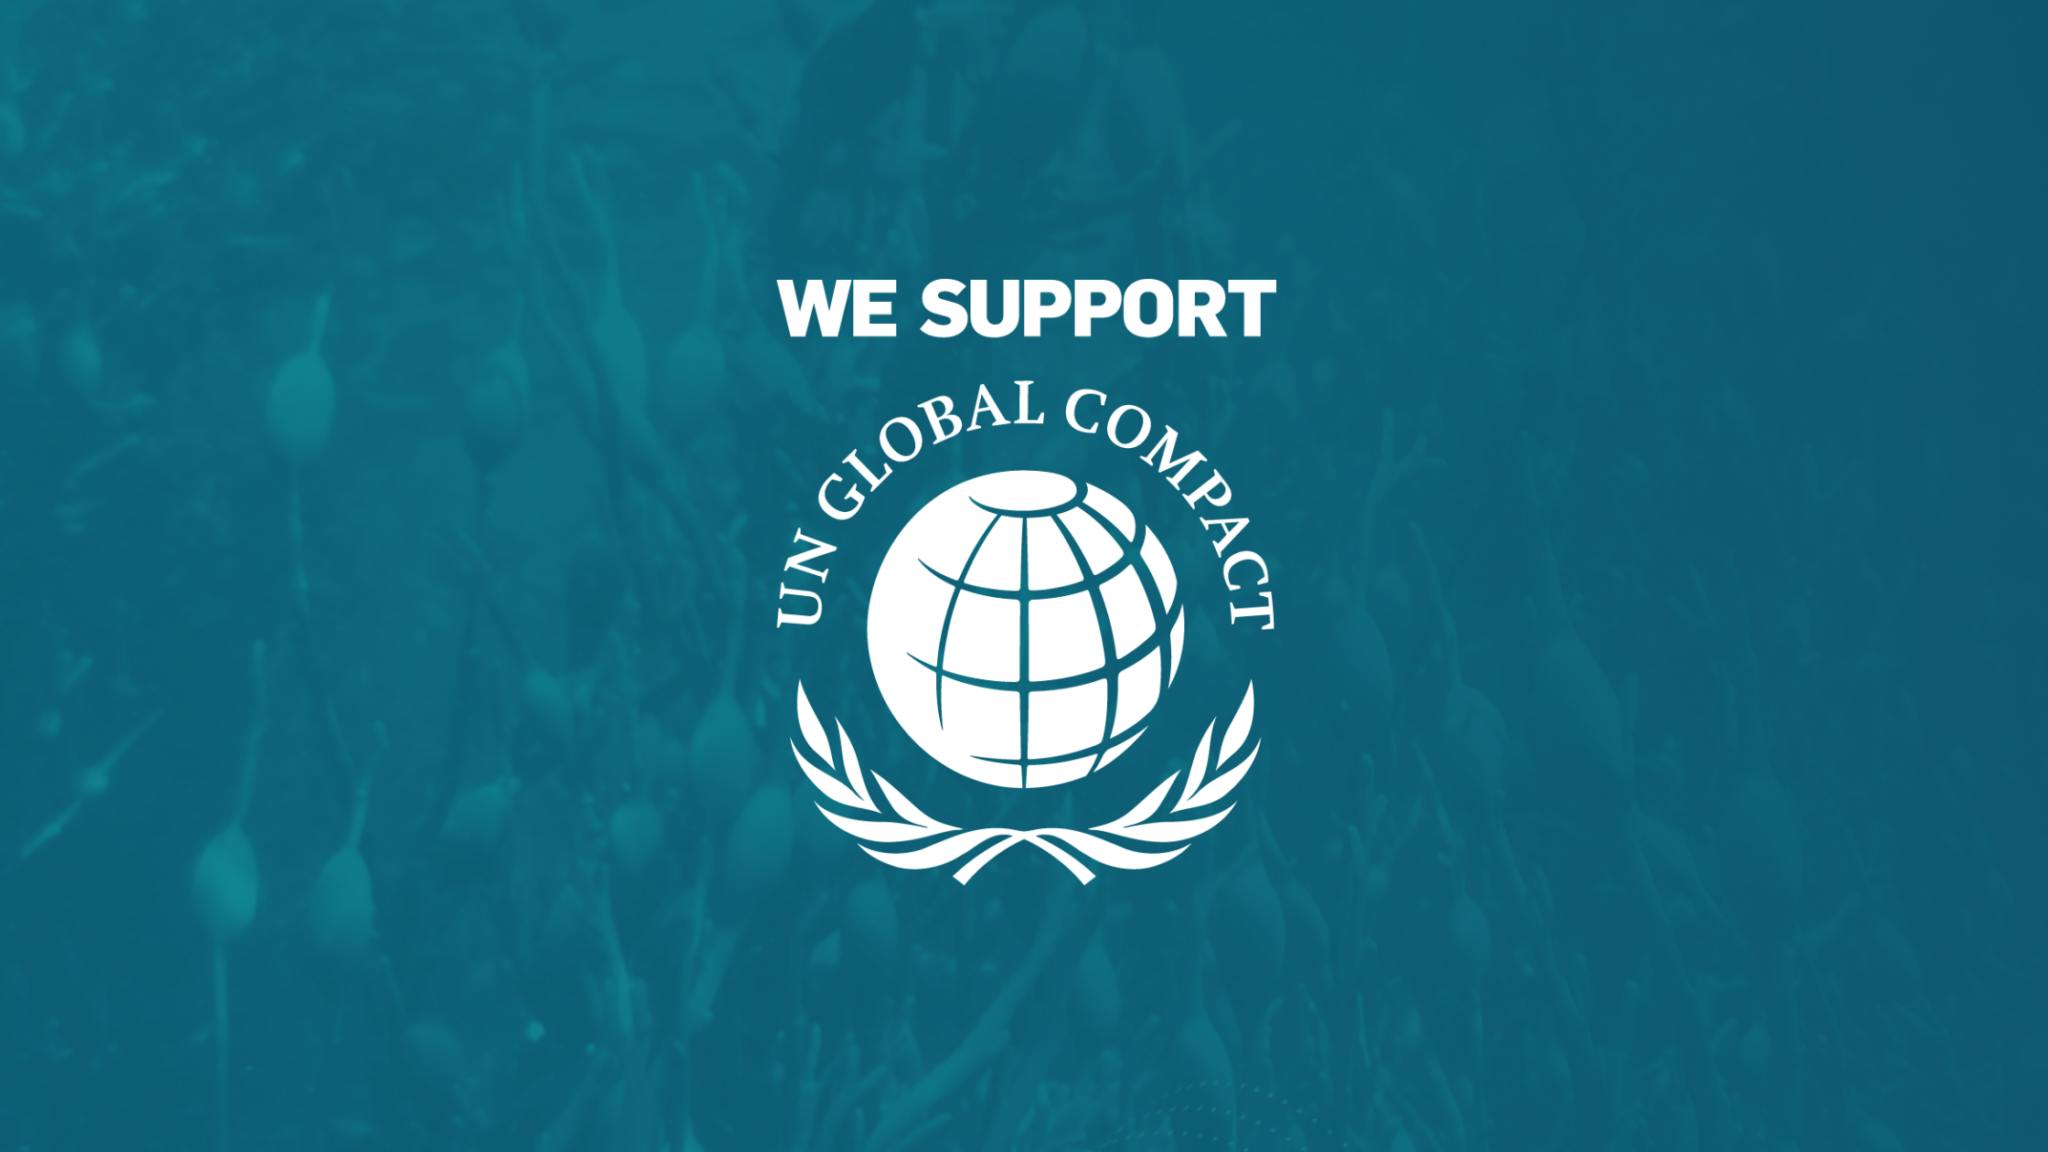 Text noting "We Support The UN Global Compact" and its logo is overlayed on a background of murky blue ocean water